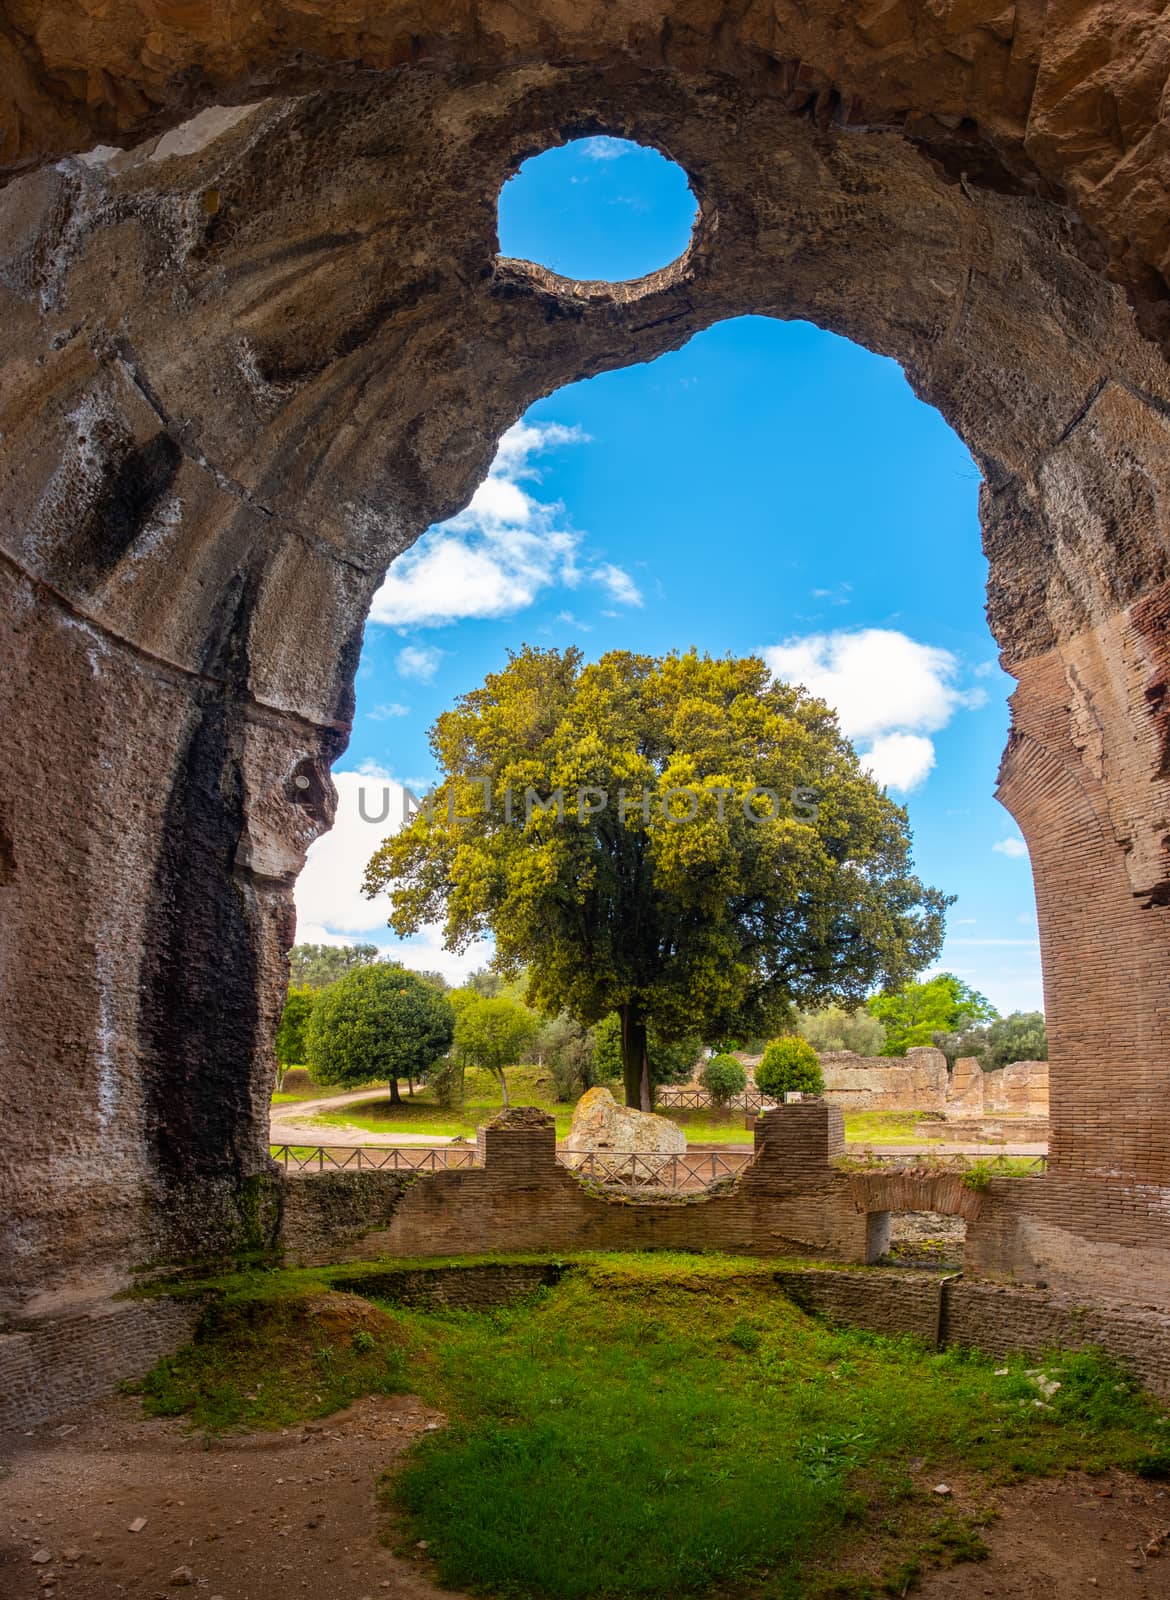 Villa Adriana - Rome Tivoli - Italy -  large tree seen through  large chasm on walls of ancient Roman palace with  circle-shaped hole on ceiling .